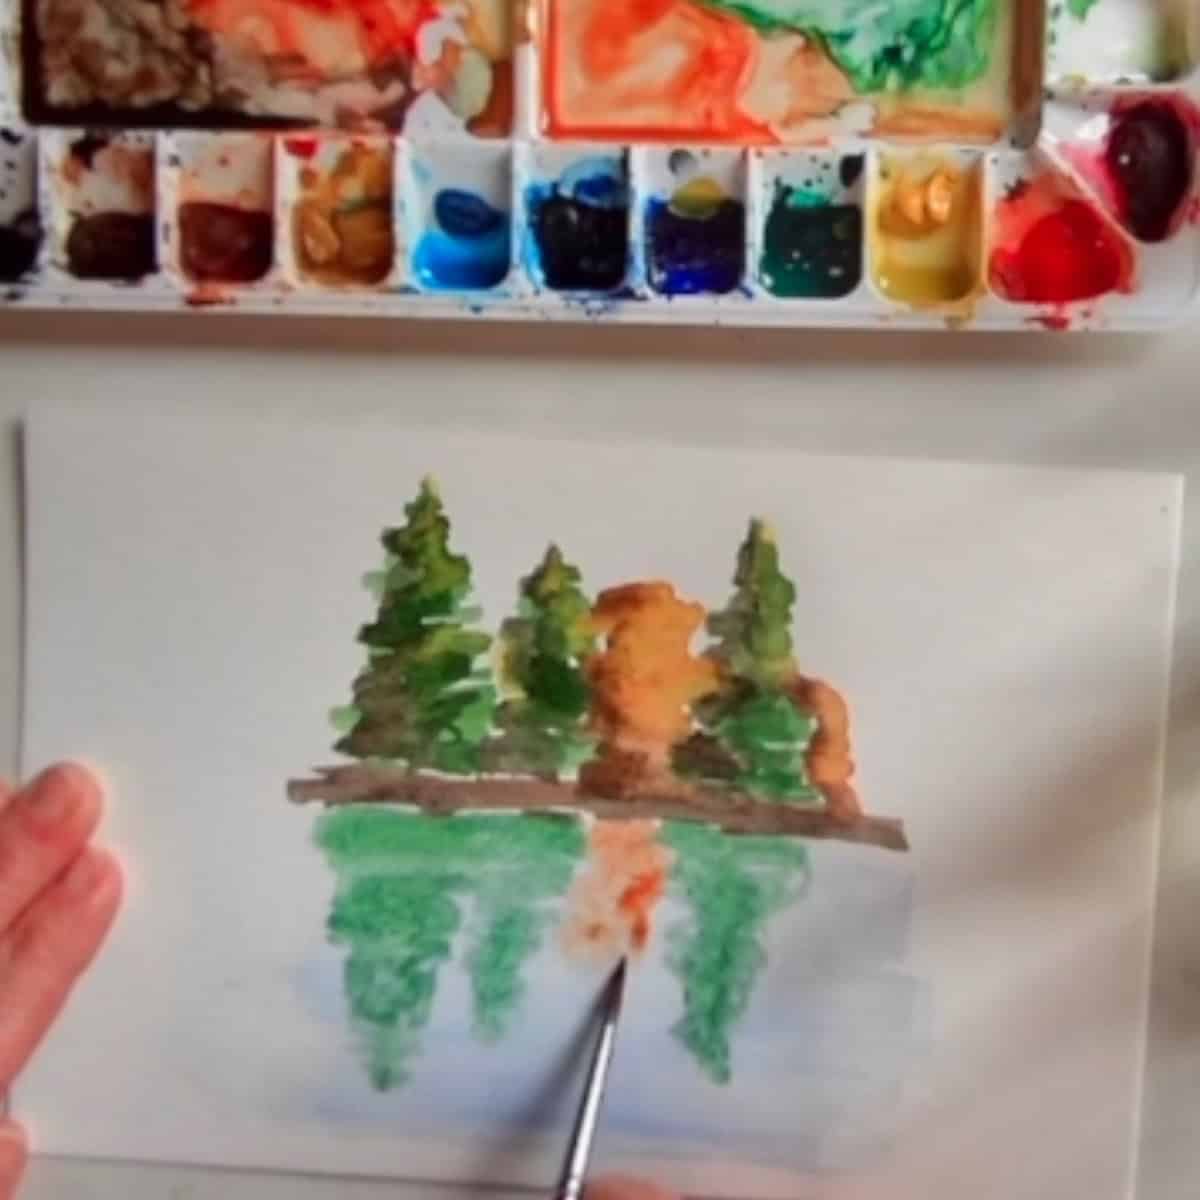 The artist's hand paints in a reflection of the trees into the water below.